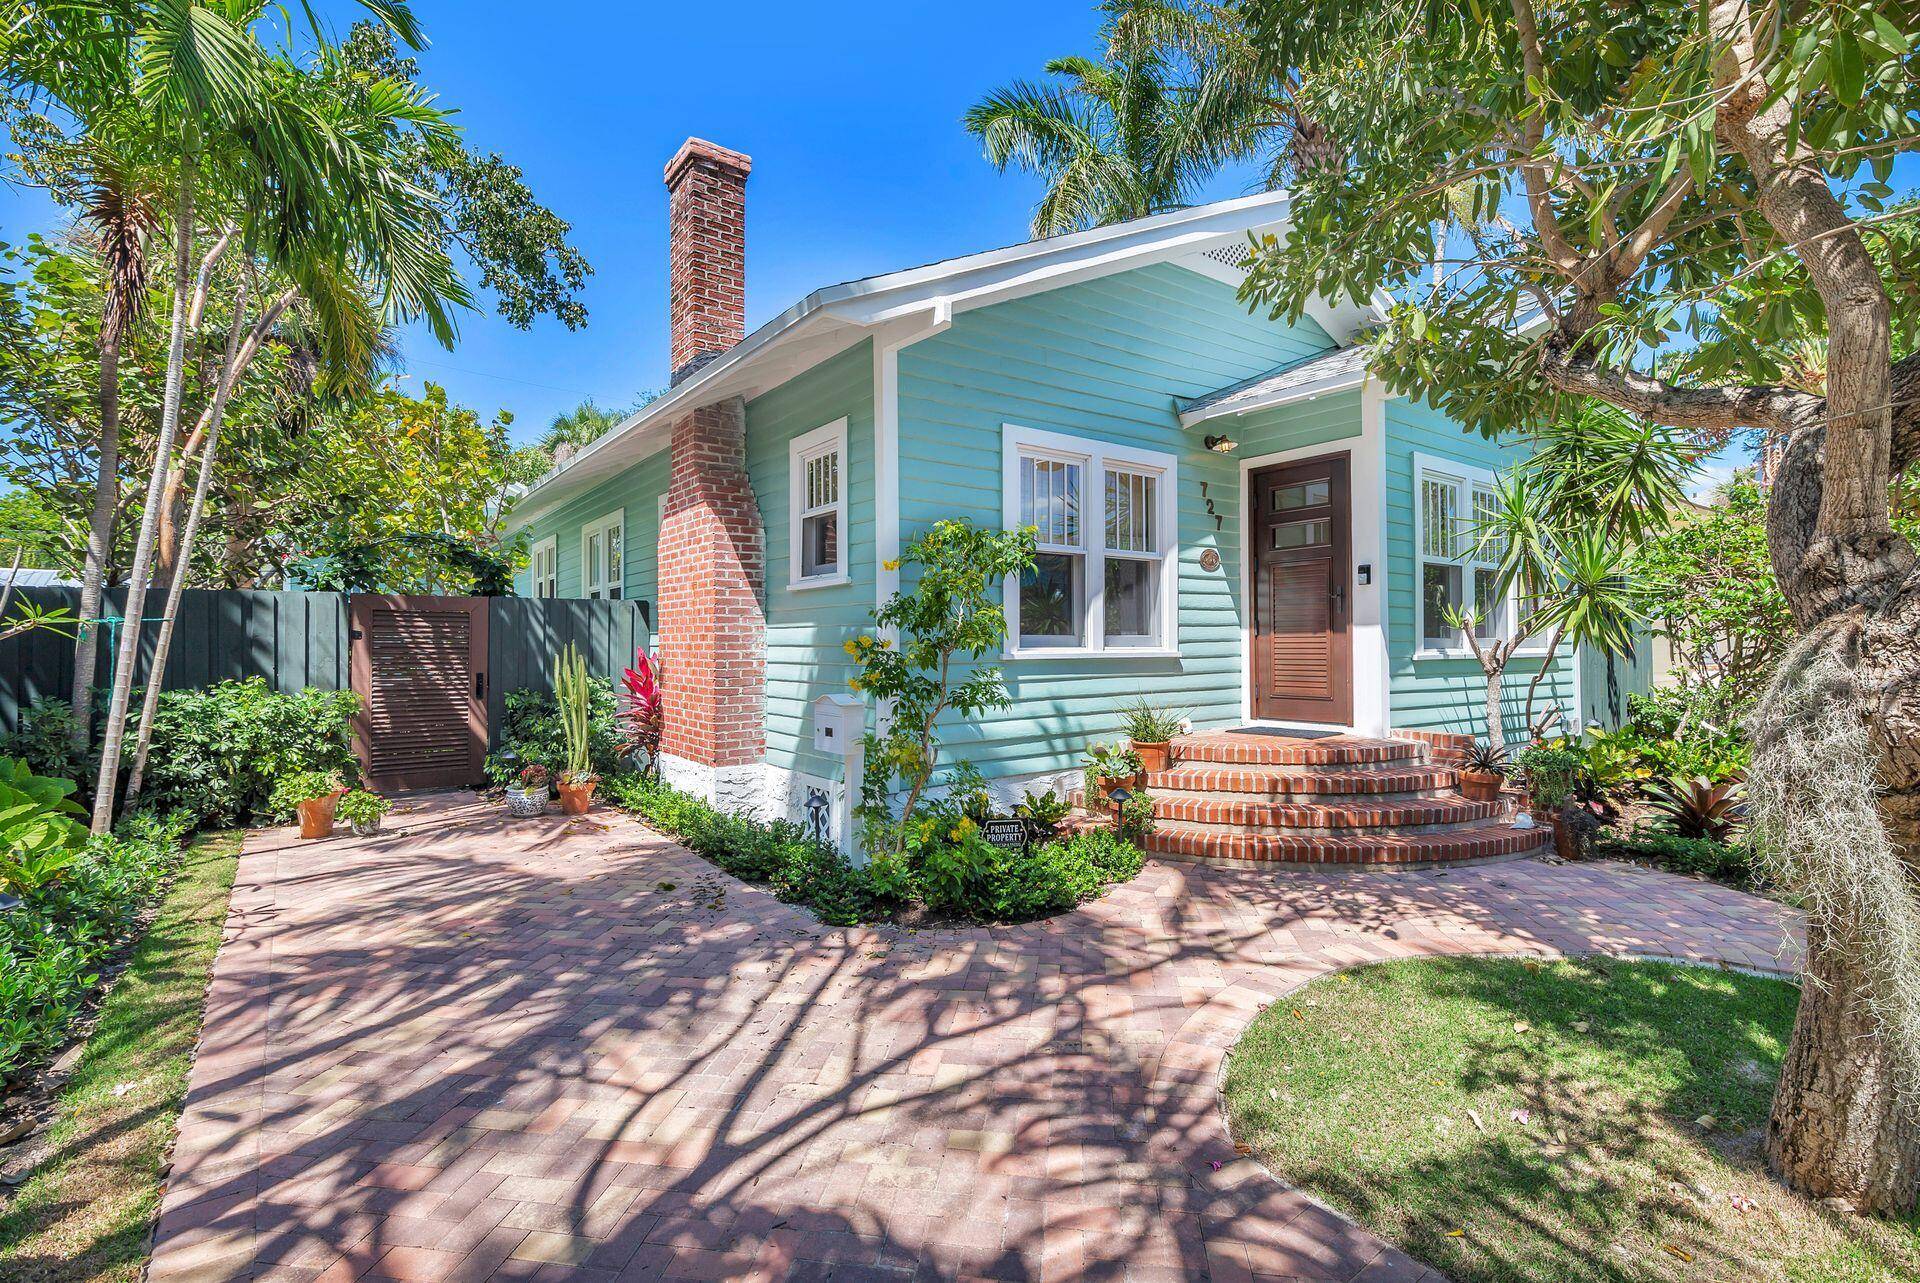 Historic Grandview Heights Craftsman's style home in the heart of everything.